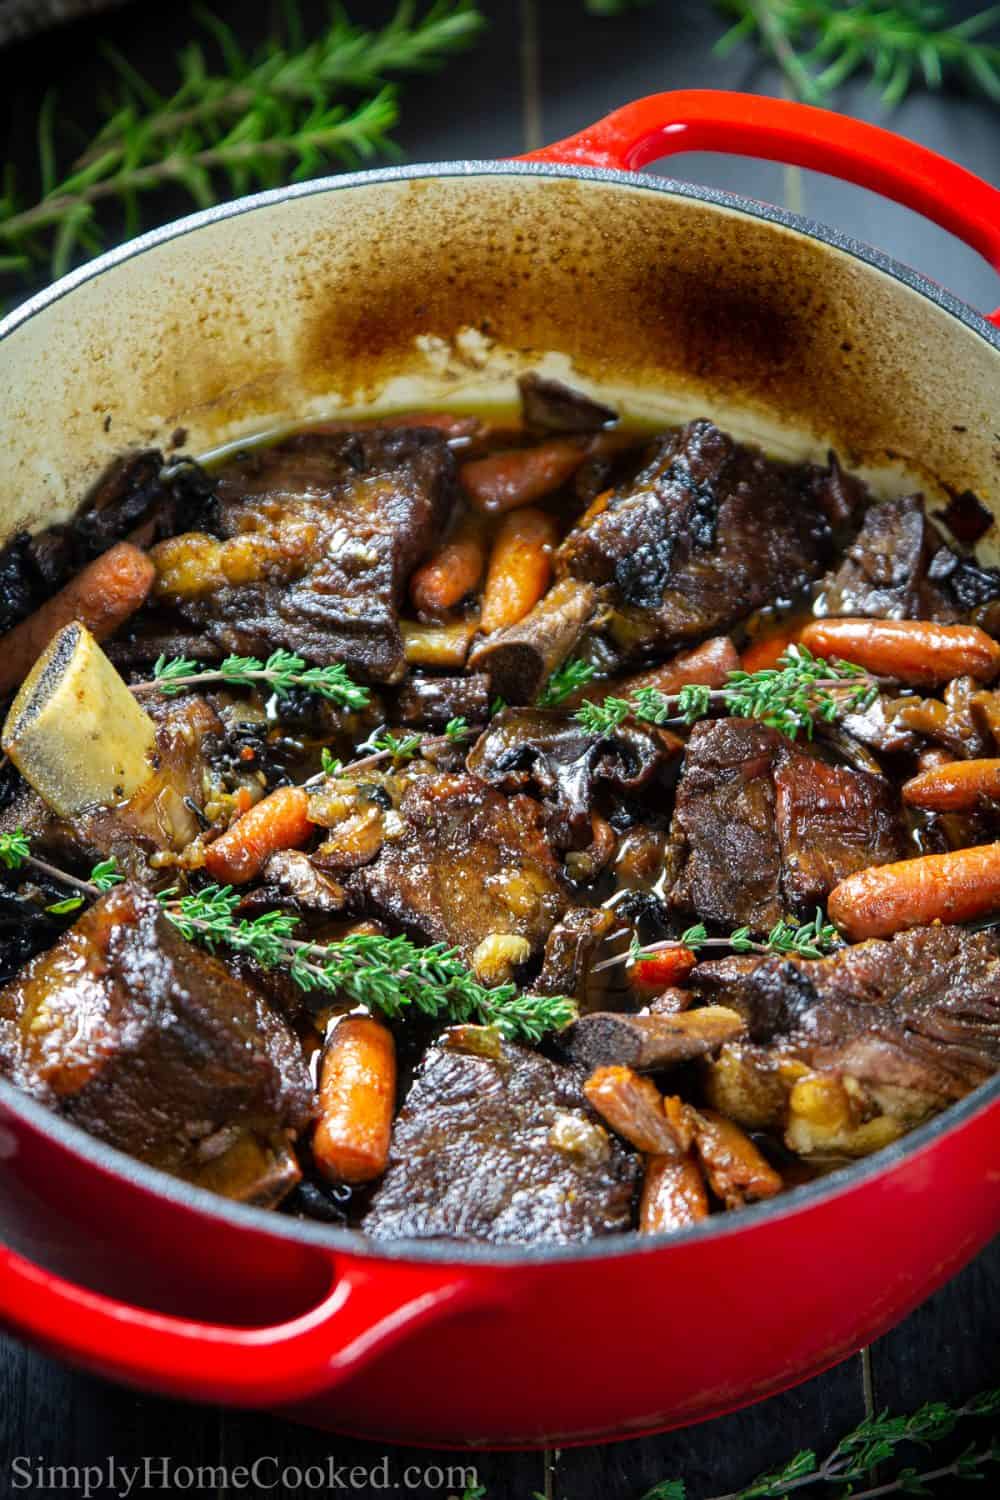 Braised Beef Short Ribs (VIDEO) - Simply Home Cooked